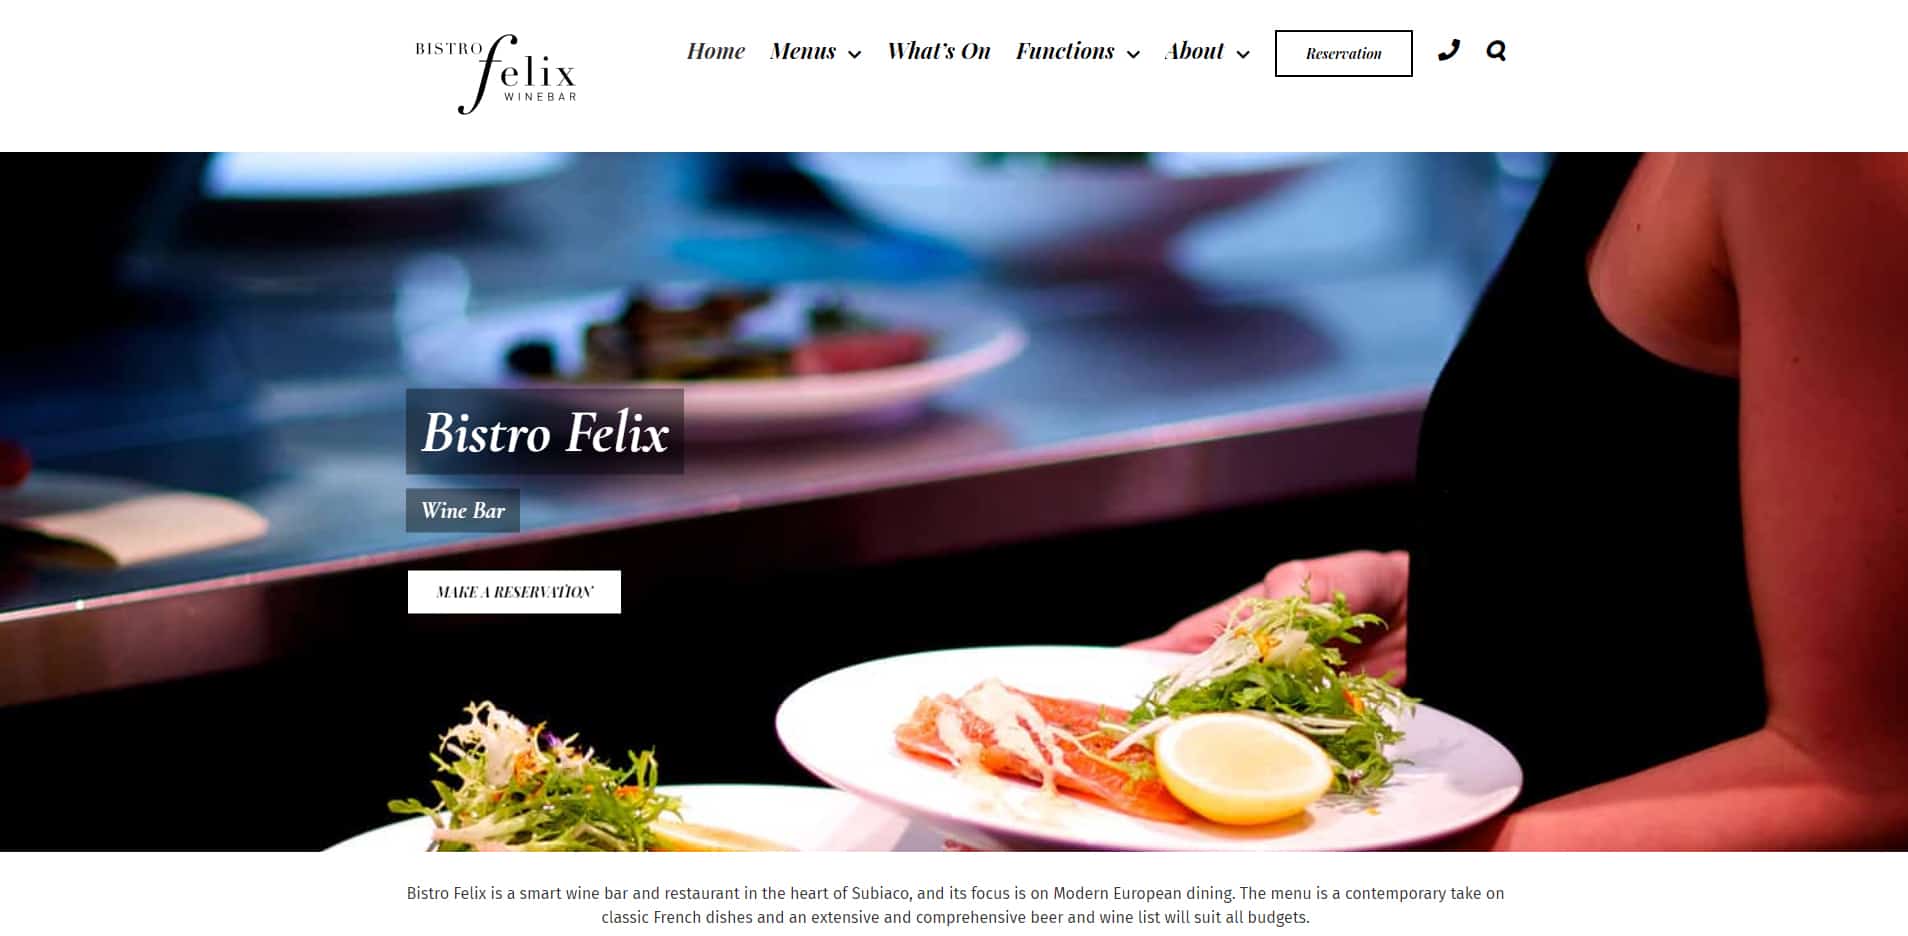 The home page of Bistro Felix Subiaco's website built by Killer Websites, local perth webdesign company